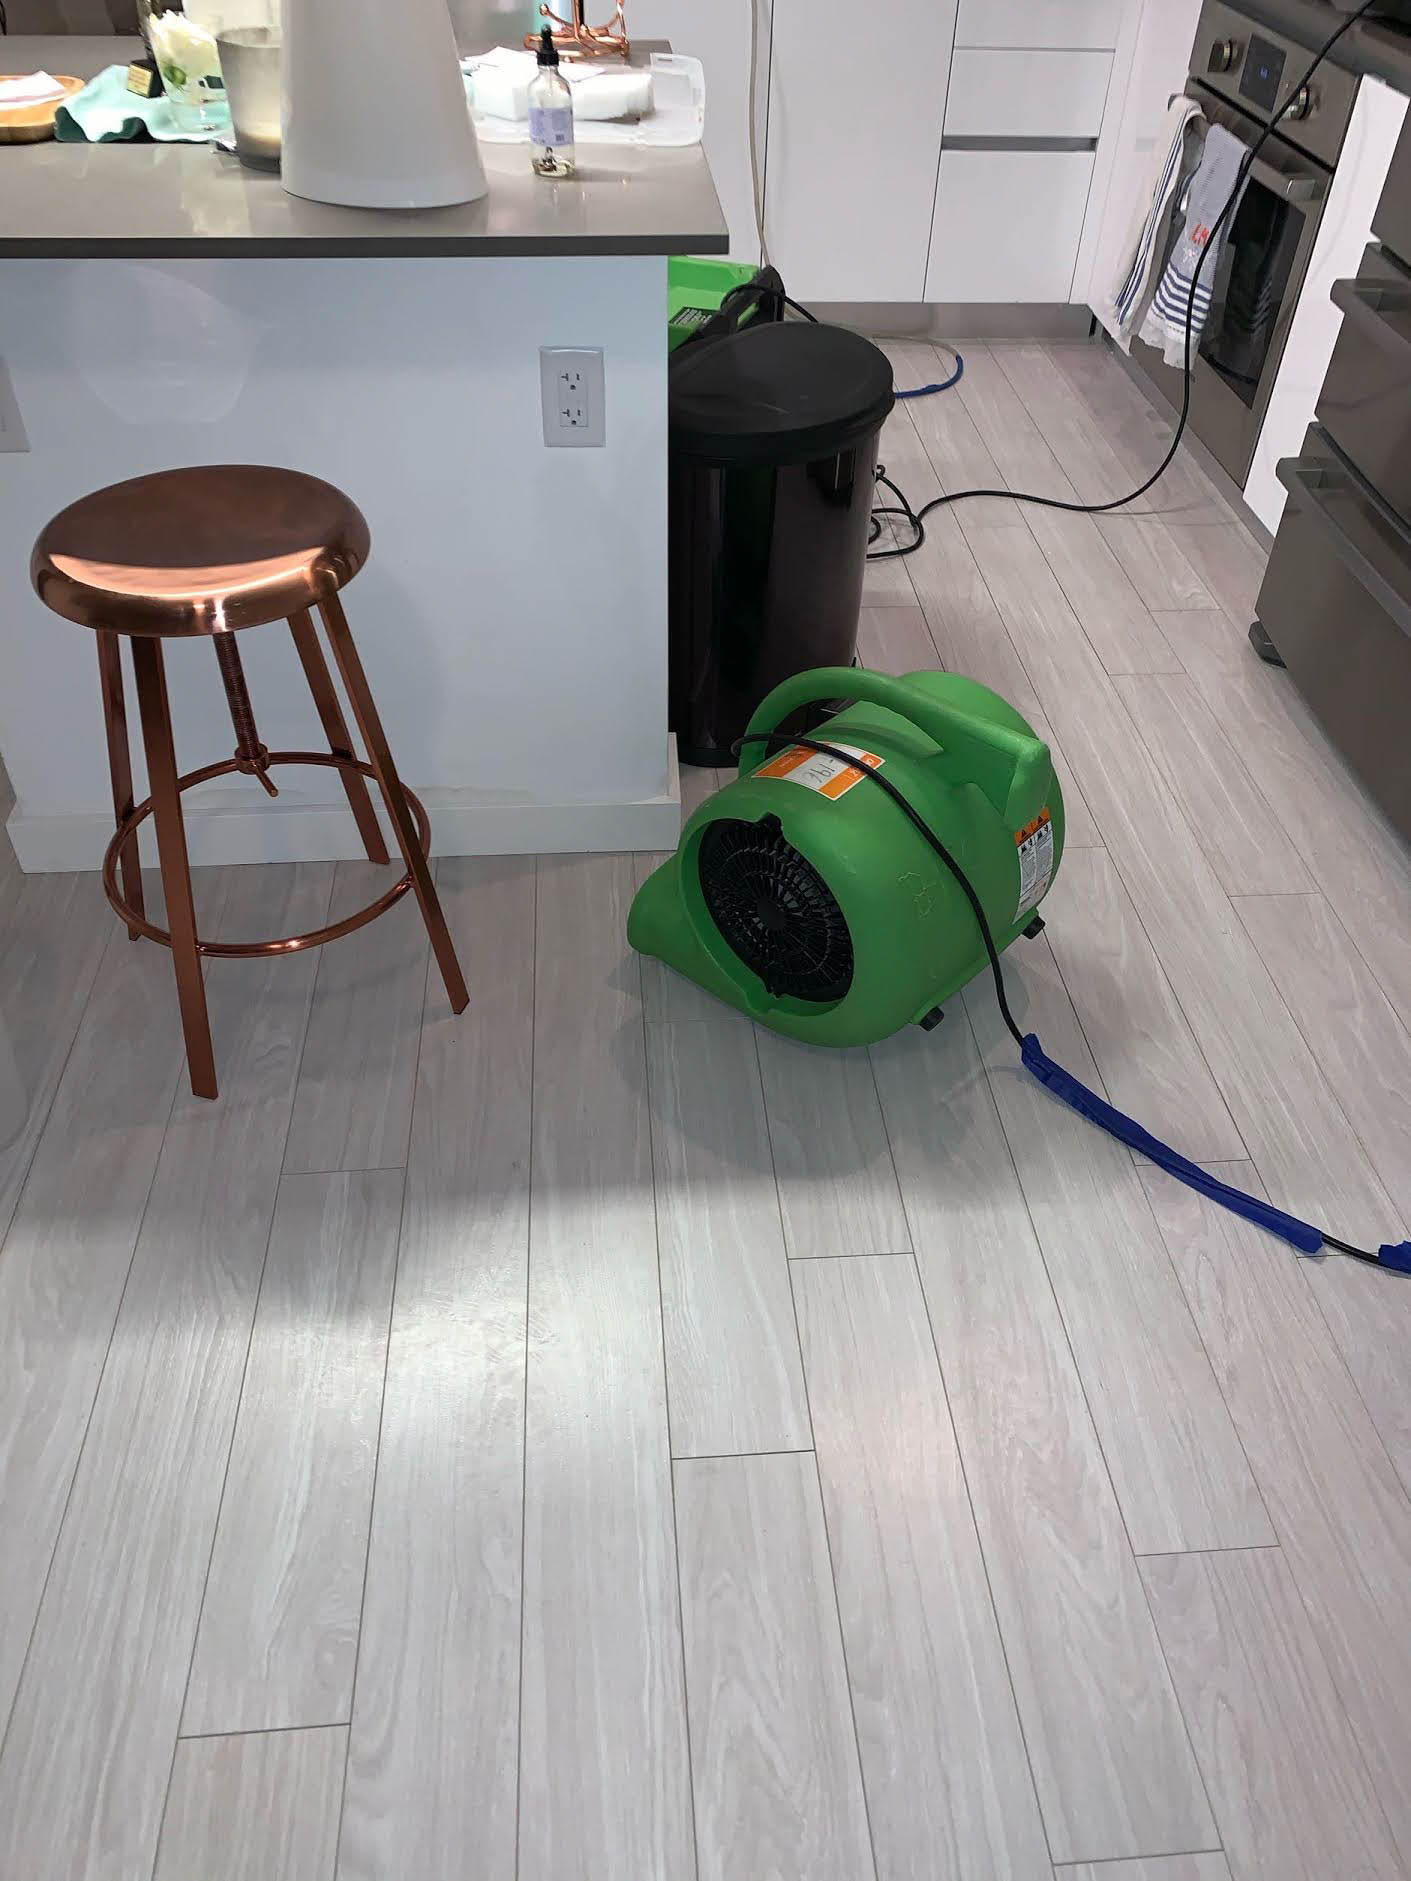 SERVPRO of Brickell responded to a water damage here in Miami. We extracted water, and set up drying equipment to dry the area.